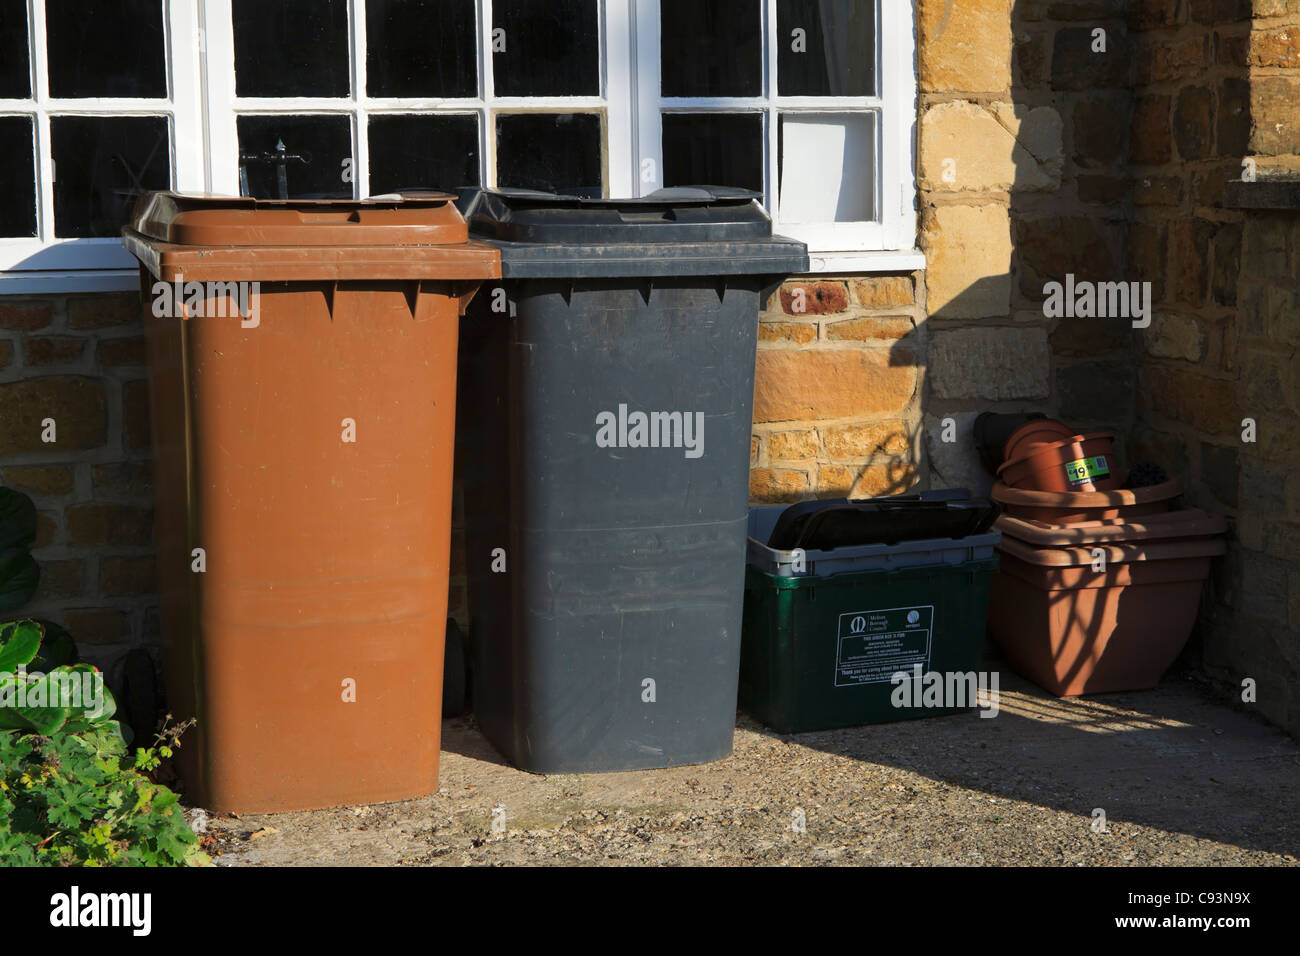 Black Bins High Resolution Stock Photography And Images Alamy